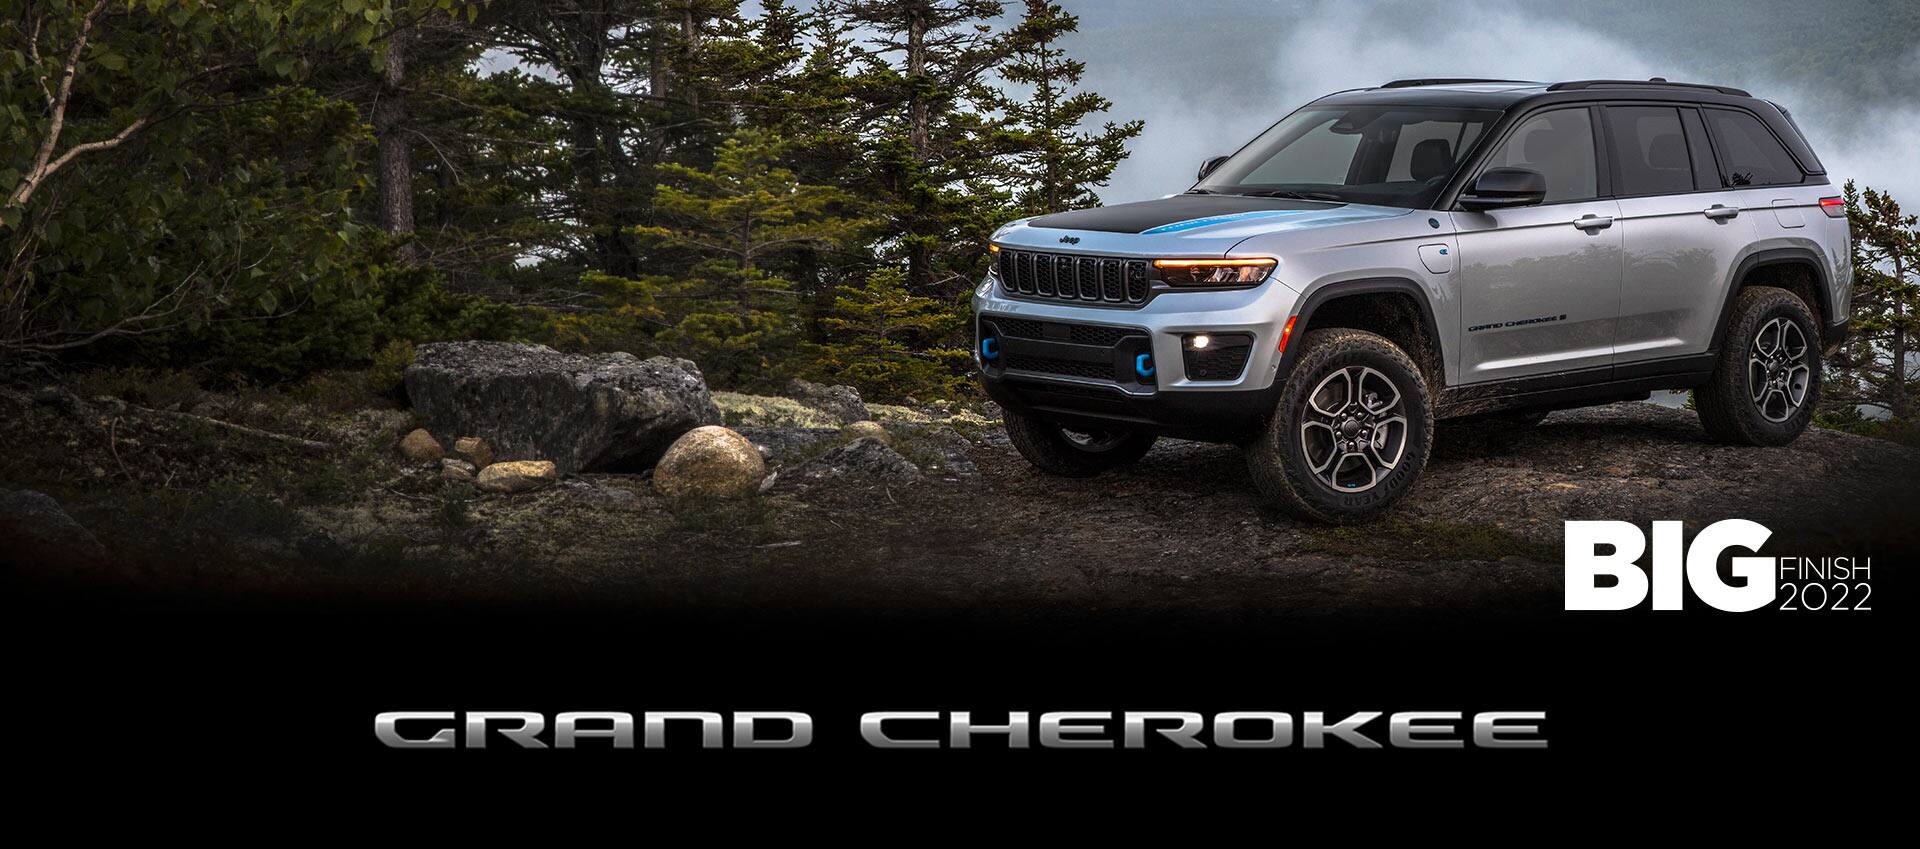 The 2022 Jeep Grand Cherokee Trailhawk 4xe parked atop a rocky clearing with evergreens nearby and misty mountains in the background. Grand Cherokee. The Big Finish 2022 logo.